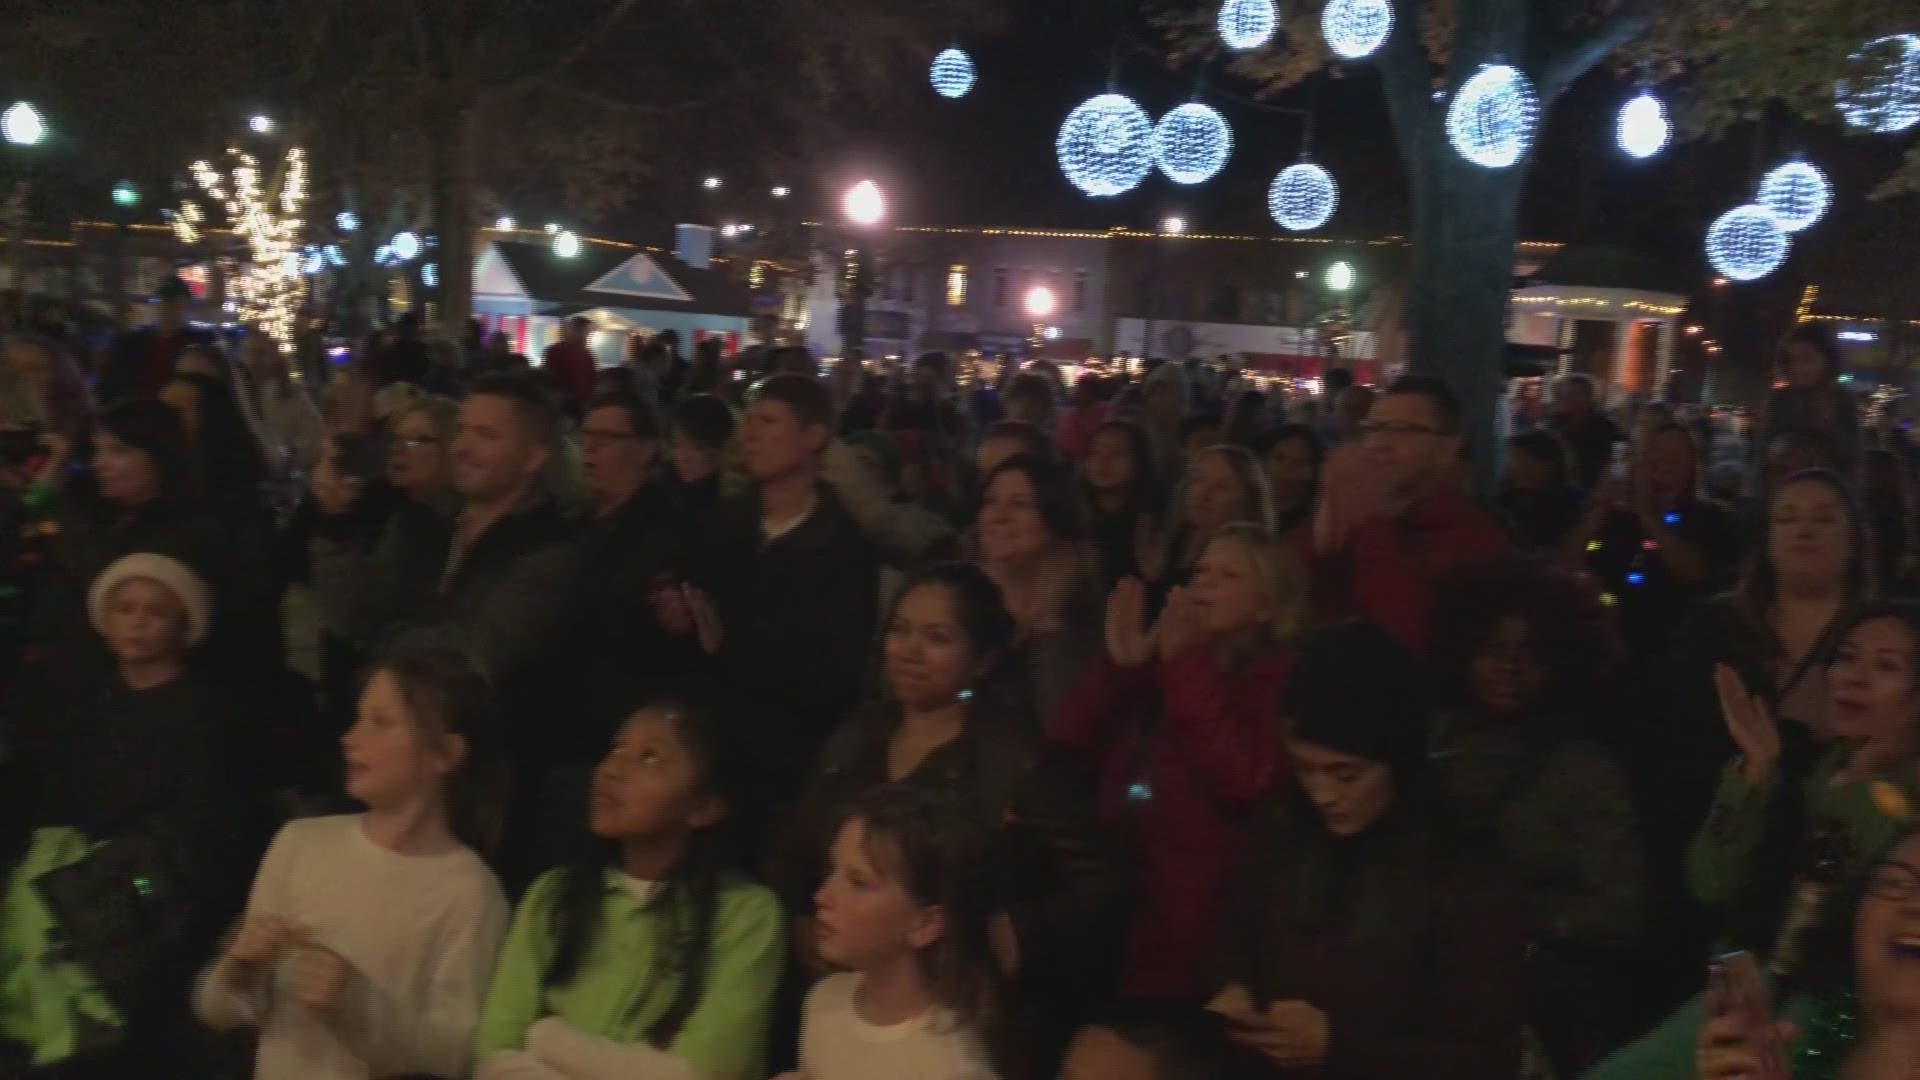 The downtown square was packed with families Thursday evening for the annual lighting of the Christmas tree.